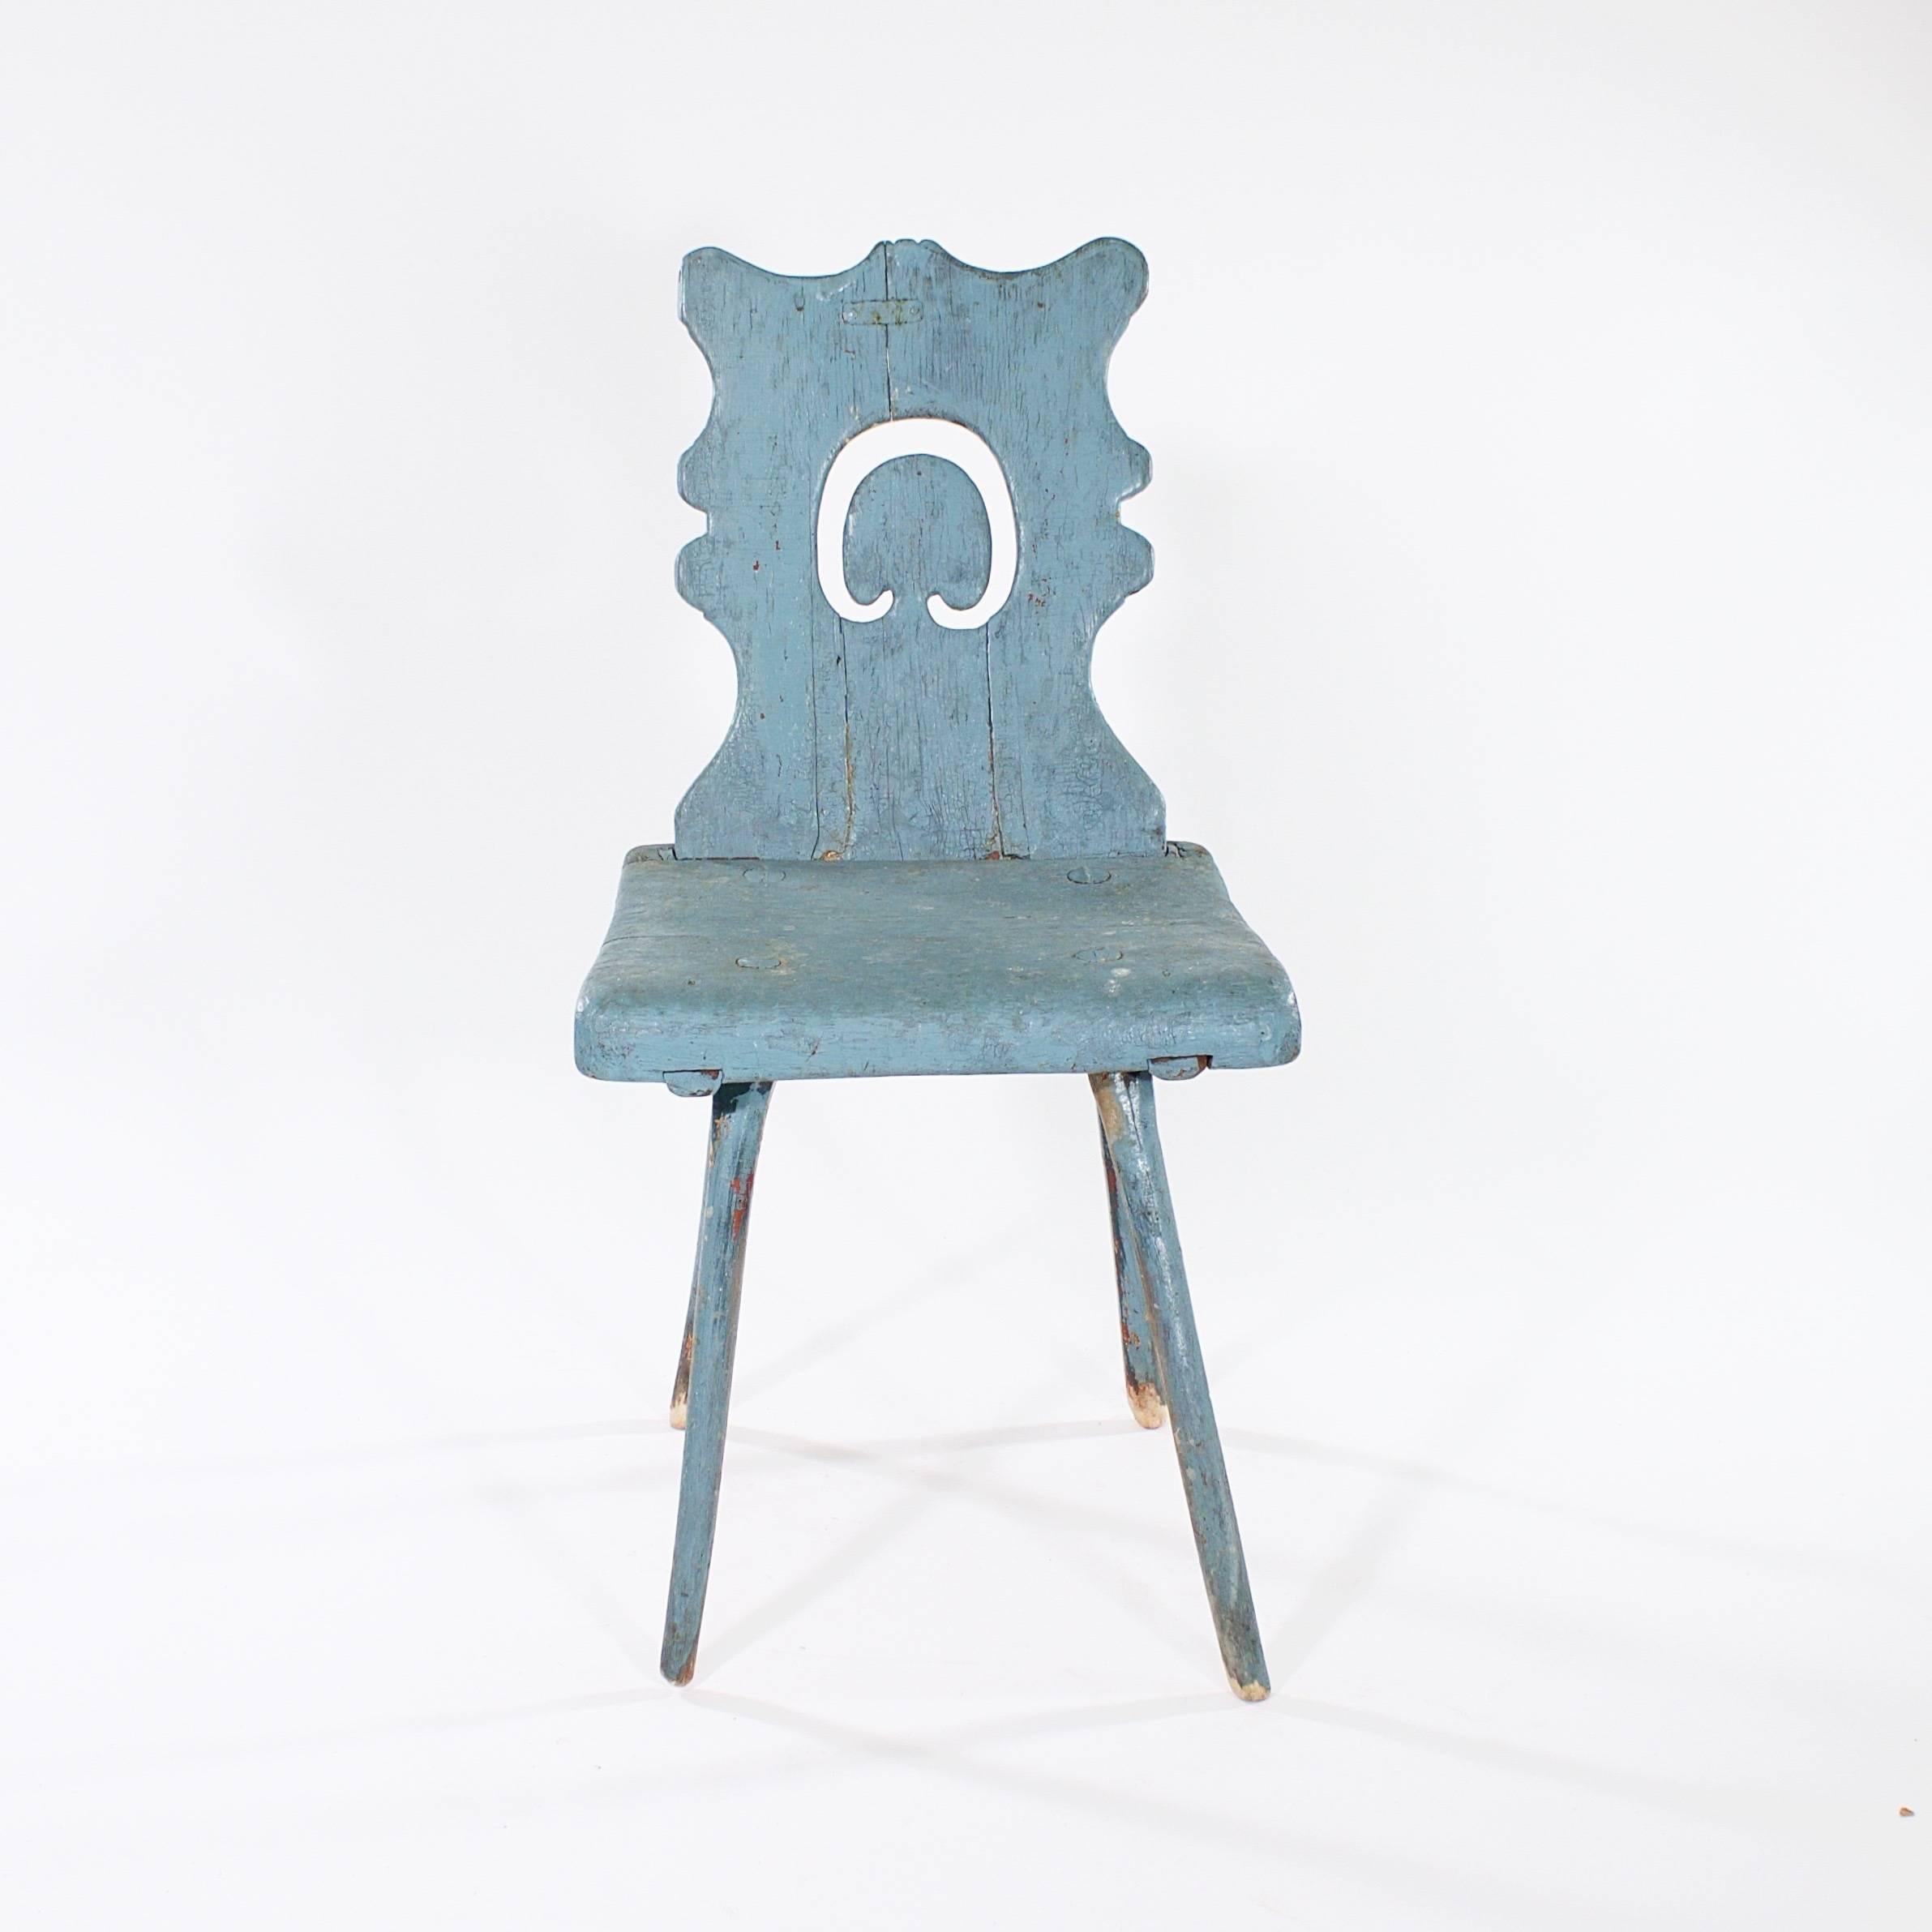 The shaped pierced back supported by a simple seat on four twig legs. With later but old blue paint.

Sweden, circa 1880s

